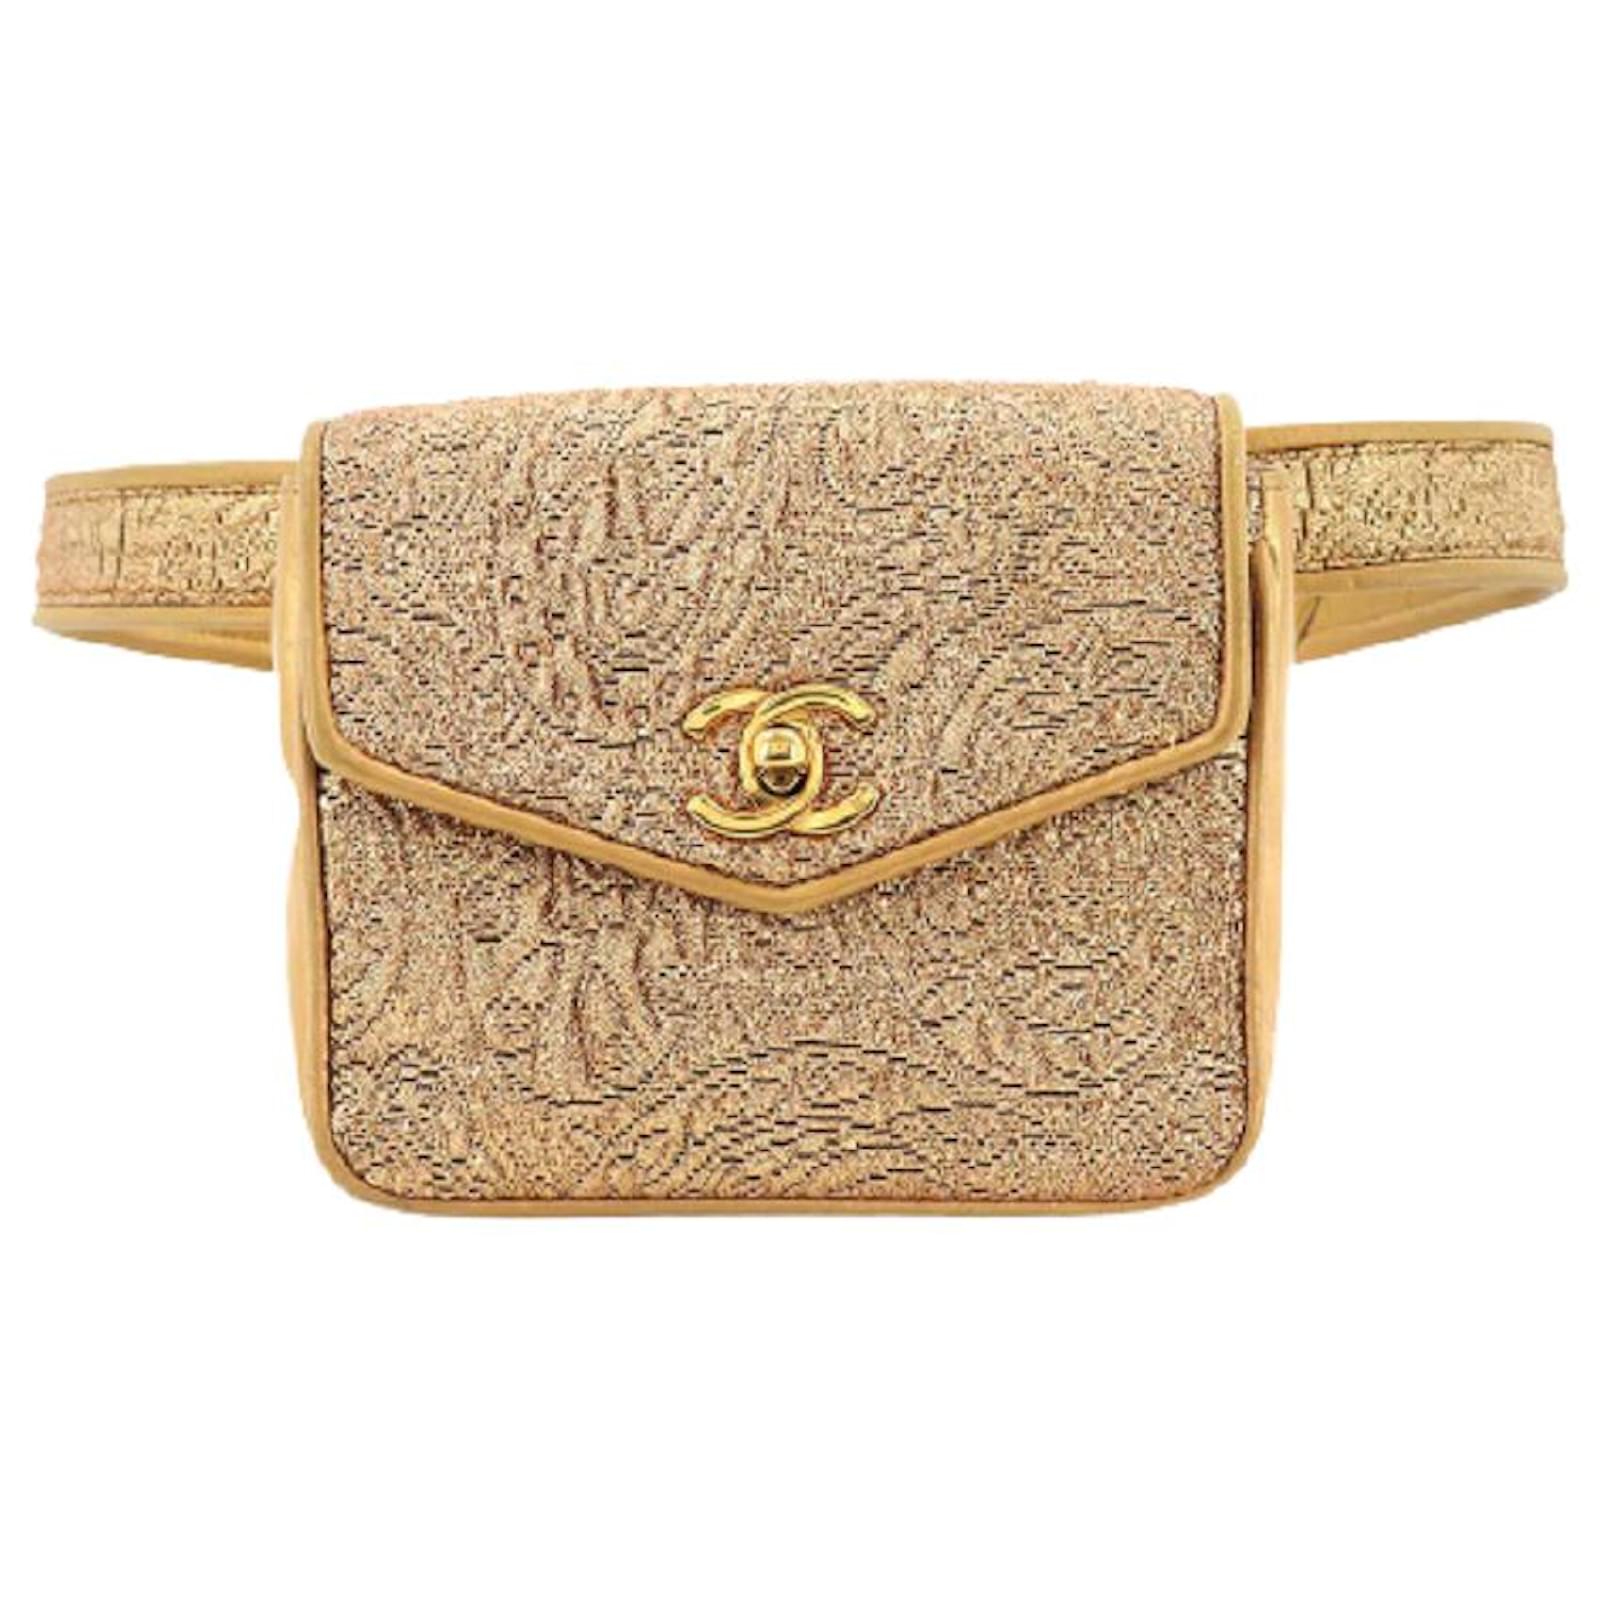 Used] Chanel Nishijin-ori Coco Mark Waist Bag Pouch Embroidery Leather Gold  Vintage Gold Metal Fittings Golden ref.506638 - Joli Closet